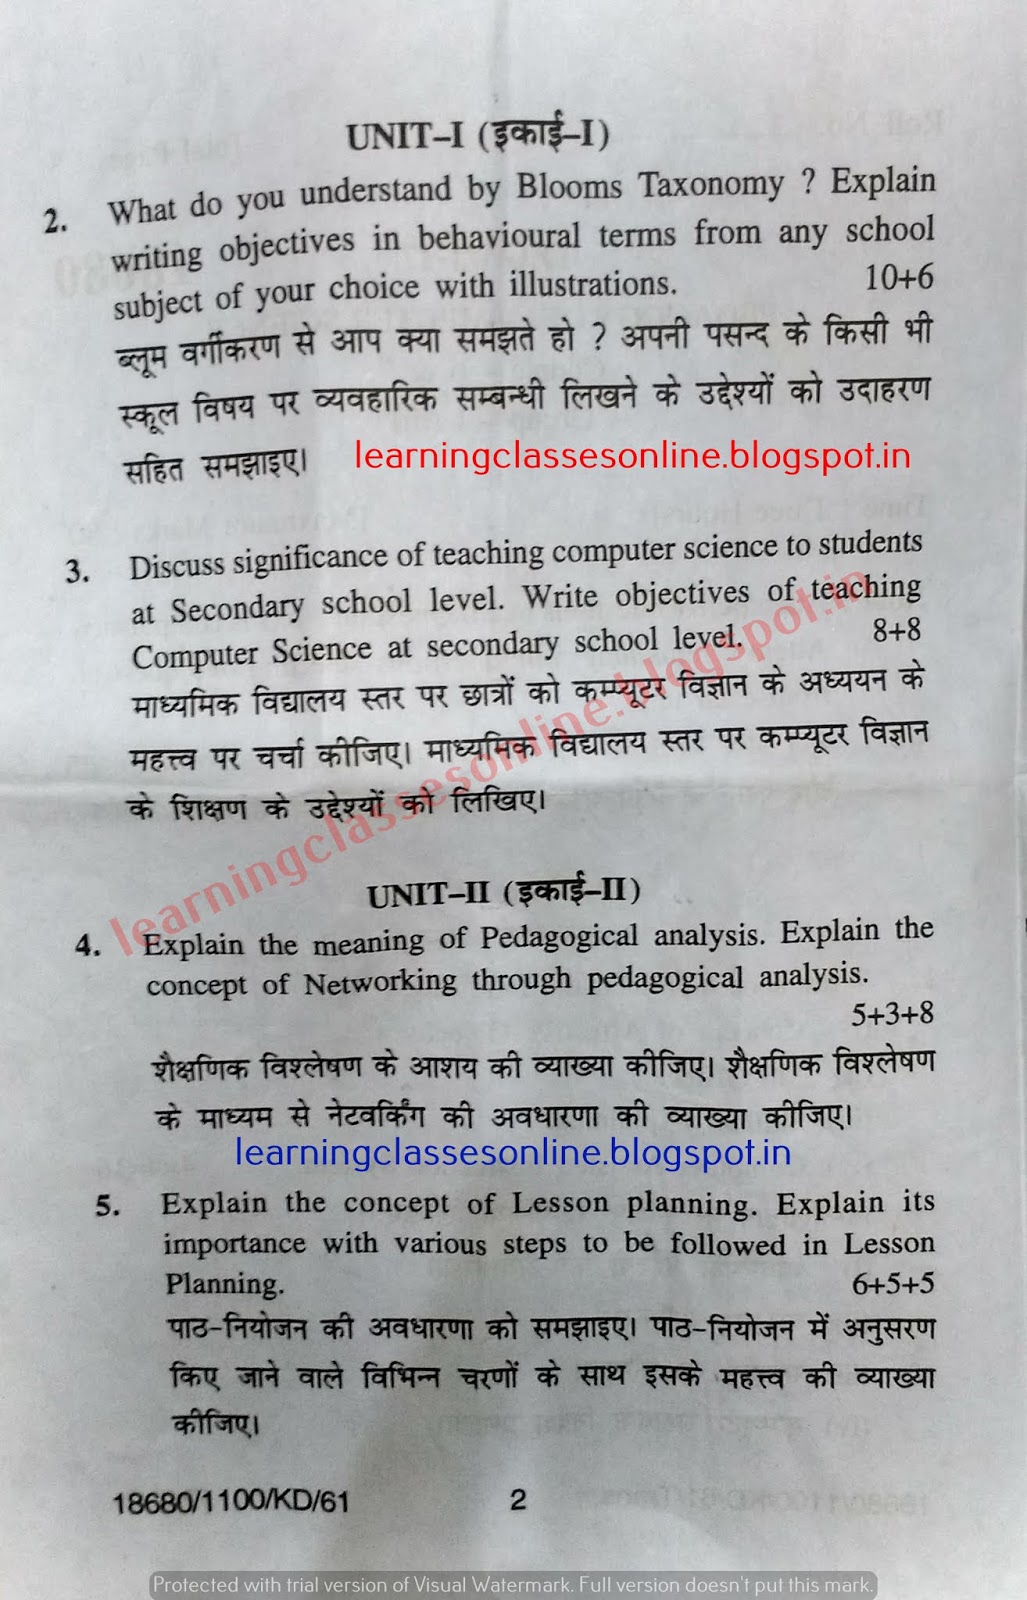 Pedagogy of computer science 2017 question paper